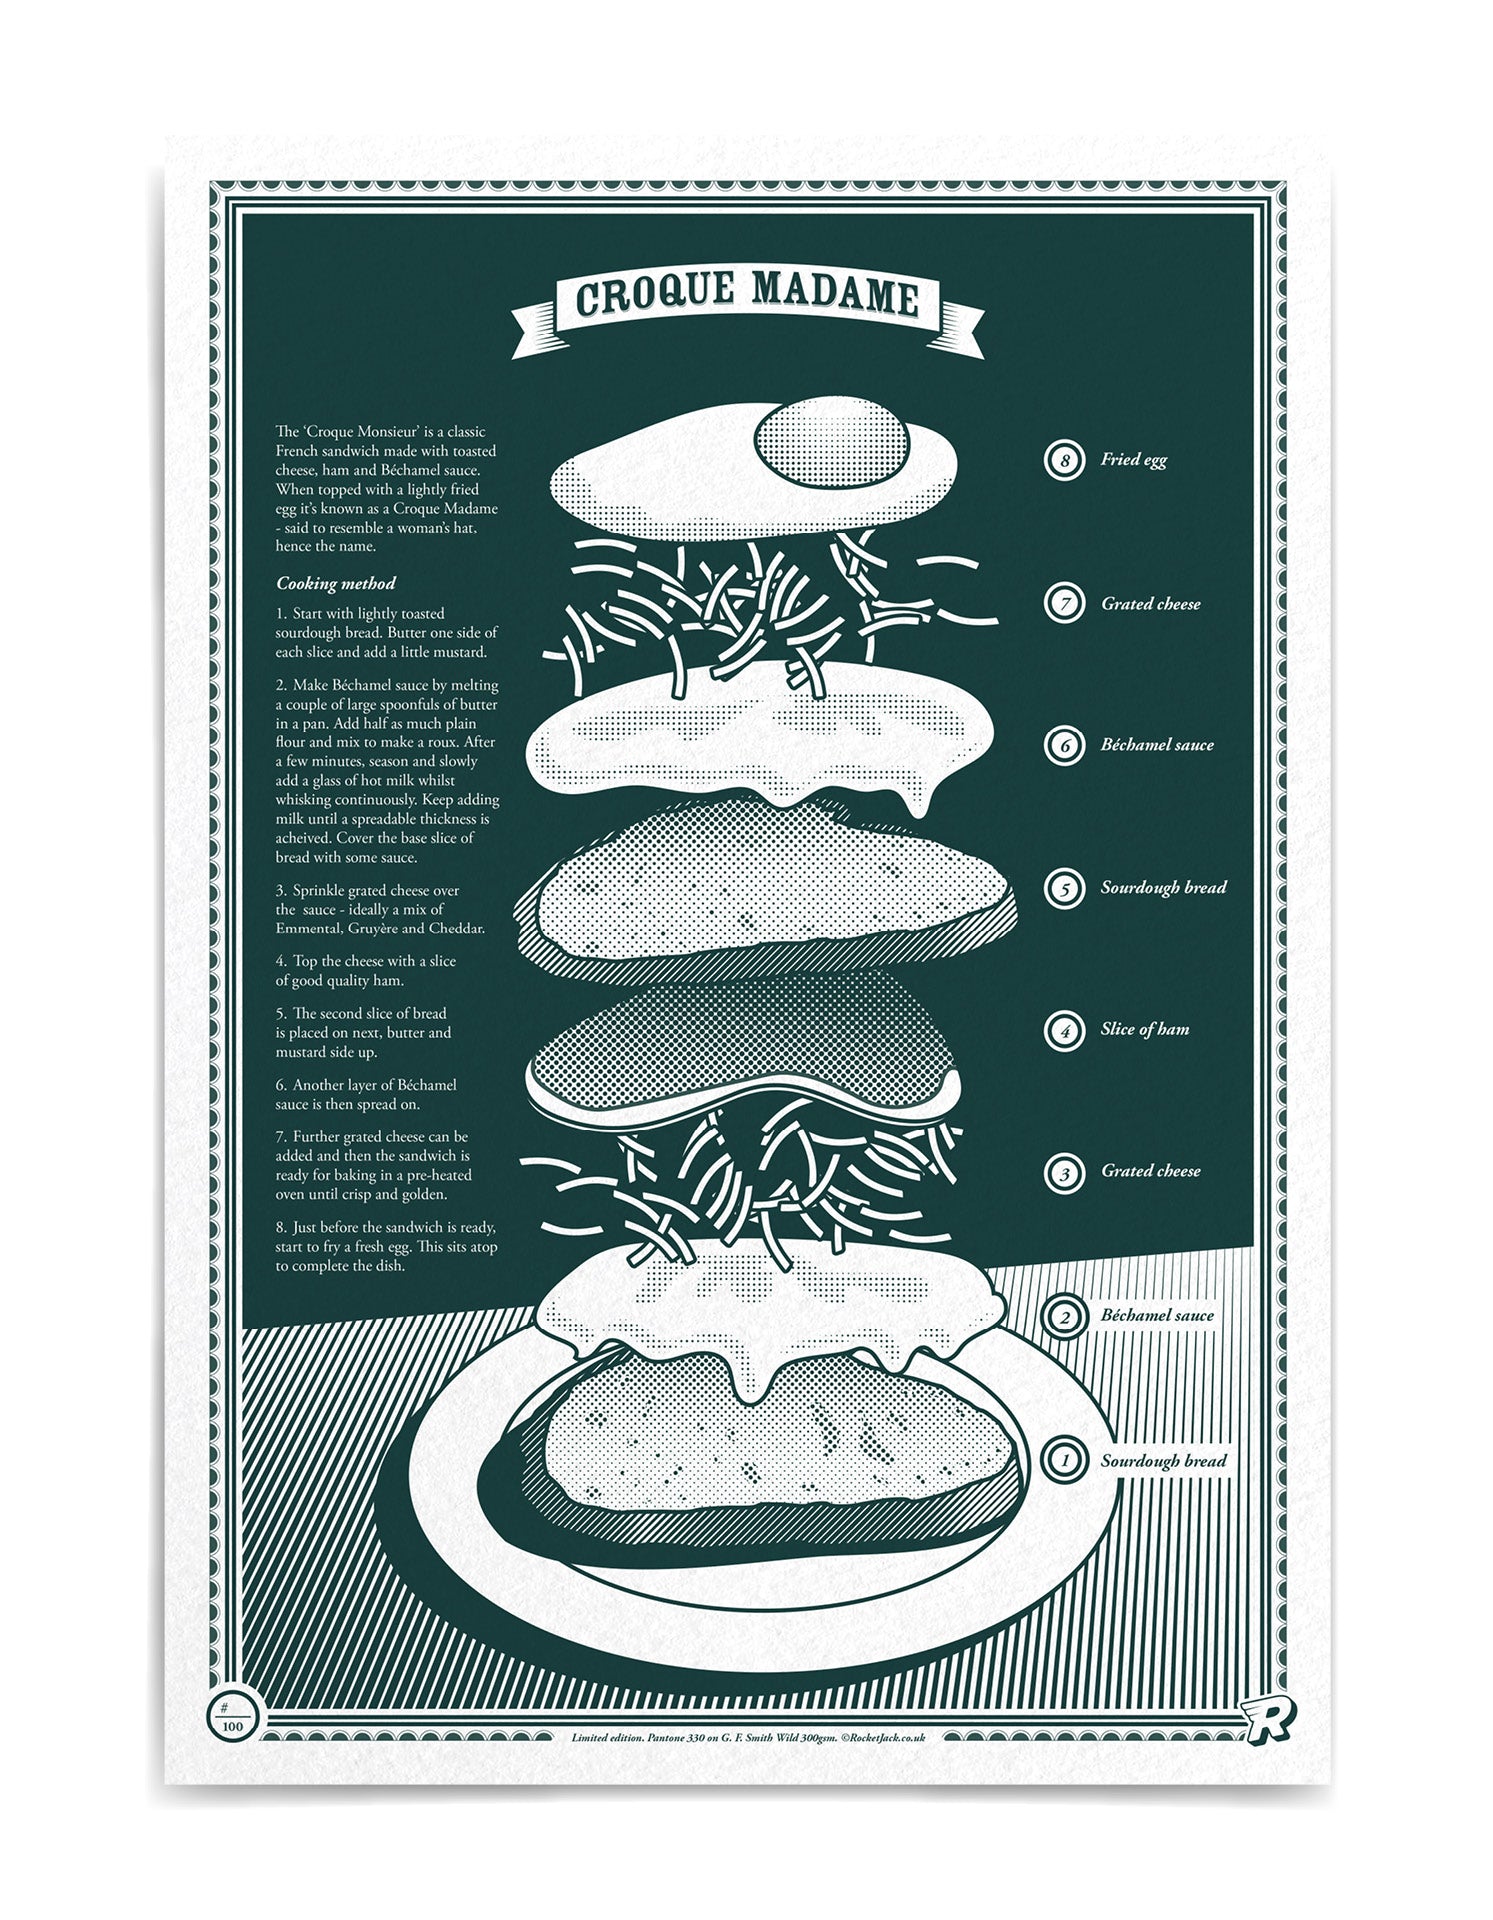 limited edition Infographic art print depicting an exploded diagram of the croque madame in monotone dark green ink